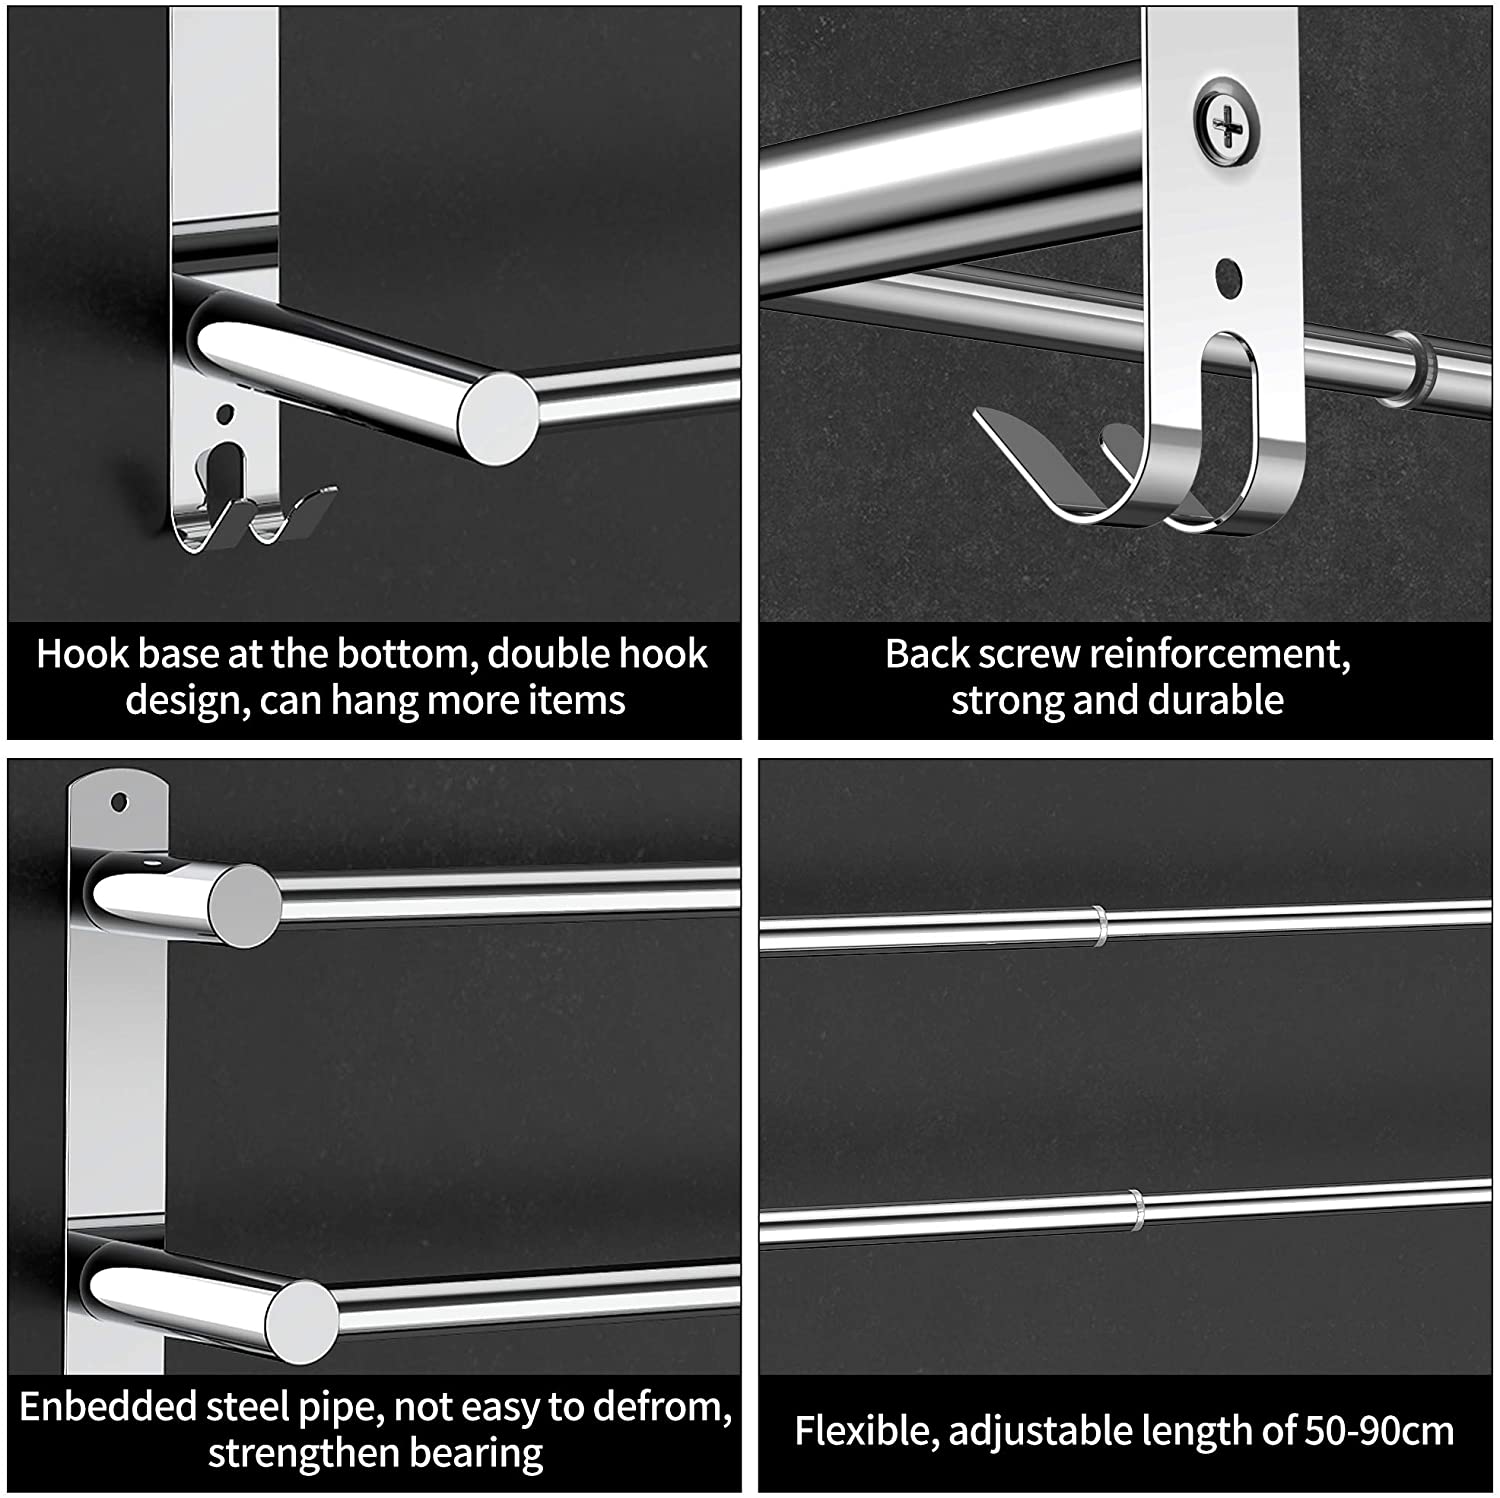 Stretchable Towel Bar For Bathroom And Kitchen (45-75 Cm, Two Bars)